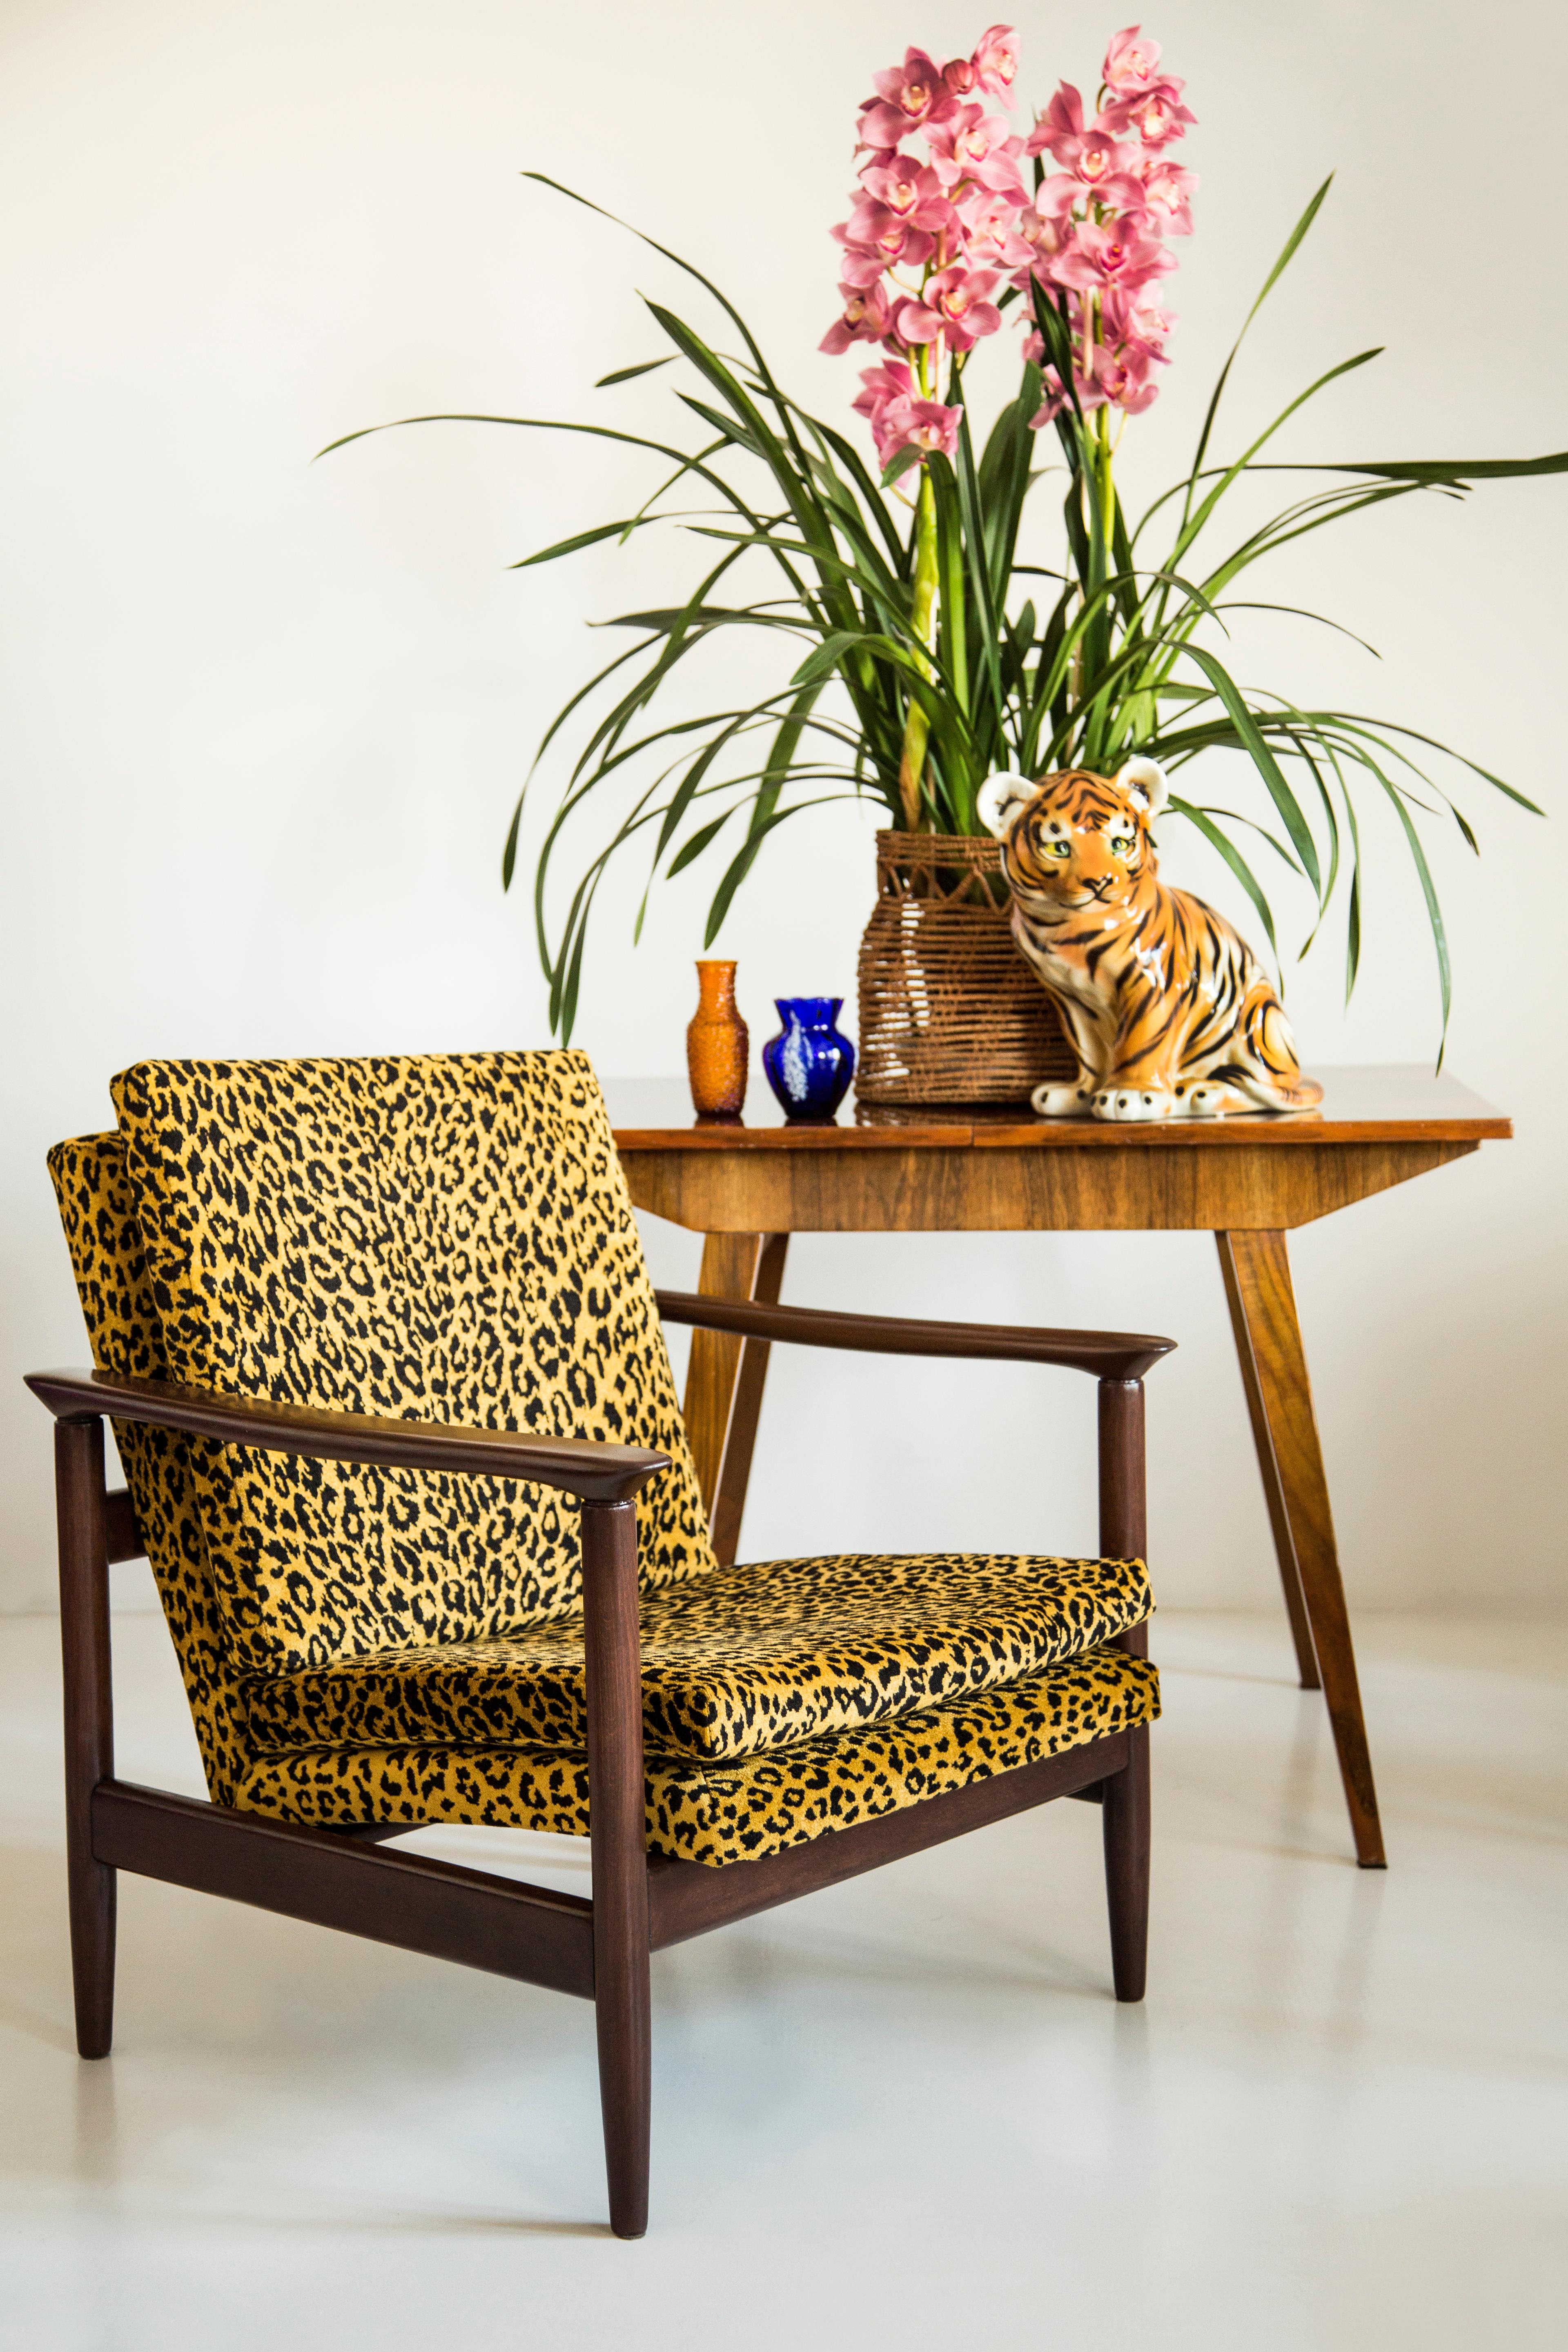 Beautiful leopard armchair GFM-142, designed by Edmund Homa, a polish architect, designer of Industrial Design and interior architecture, professor at the Academy of Fine Arts in Gdansk. 

The armchair was made in the 1960s in the Gosciecinska